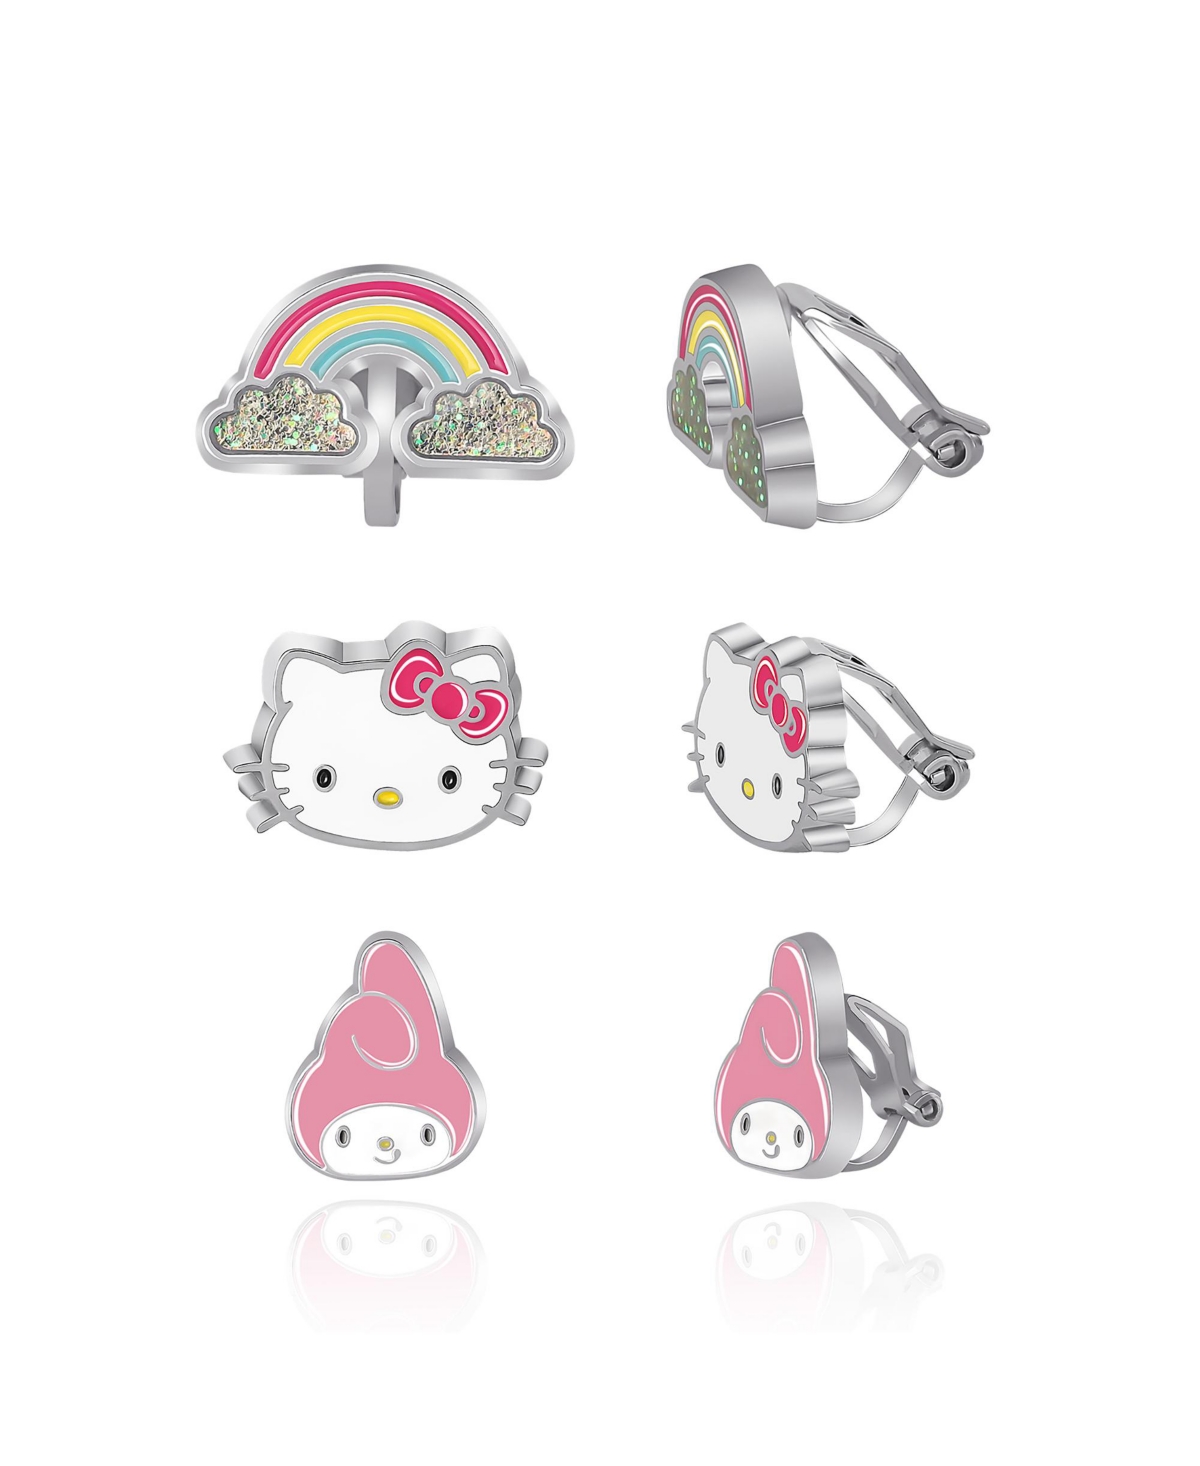 Sanrio Hello Kitty and Friends Clip On Earrings 3-Pack - Rainbow, My Melody and Hello Kitty Earrings" - Pink, white, red